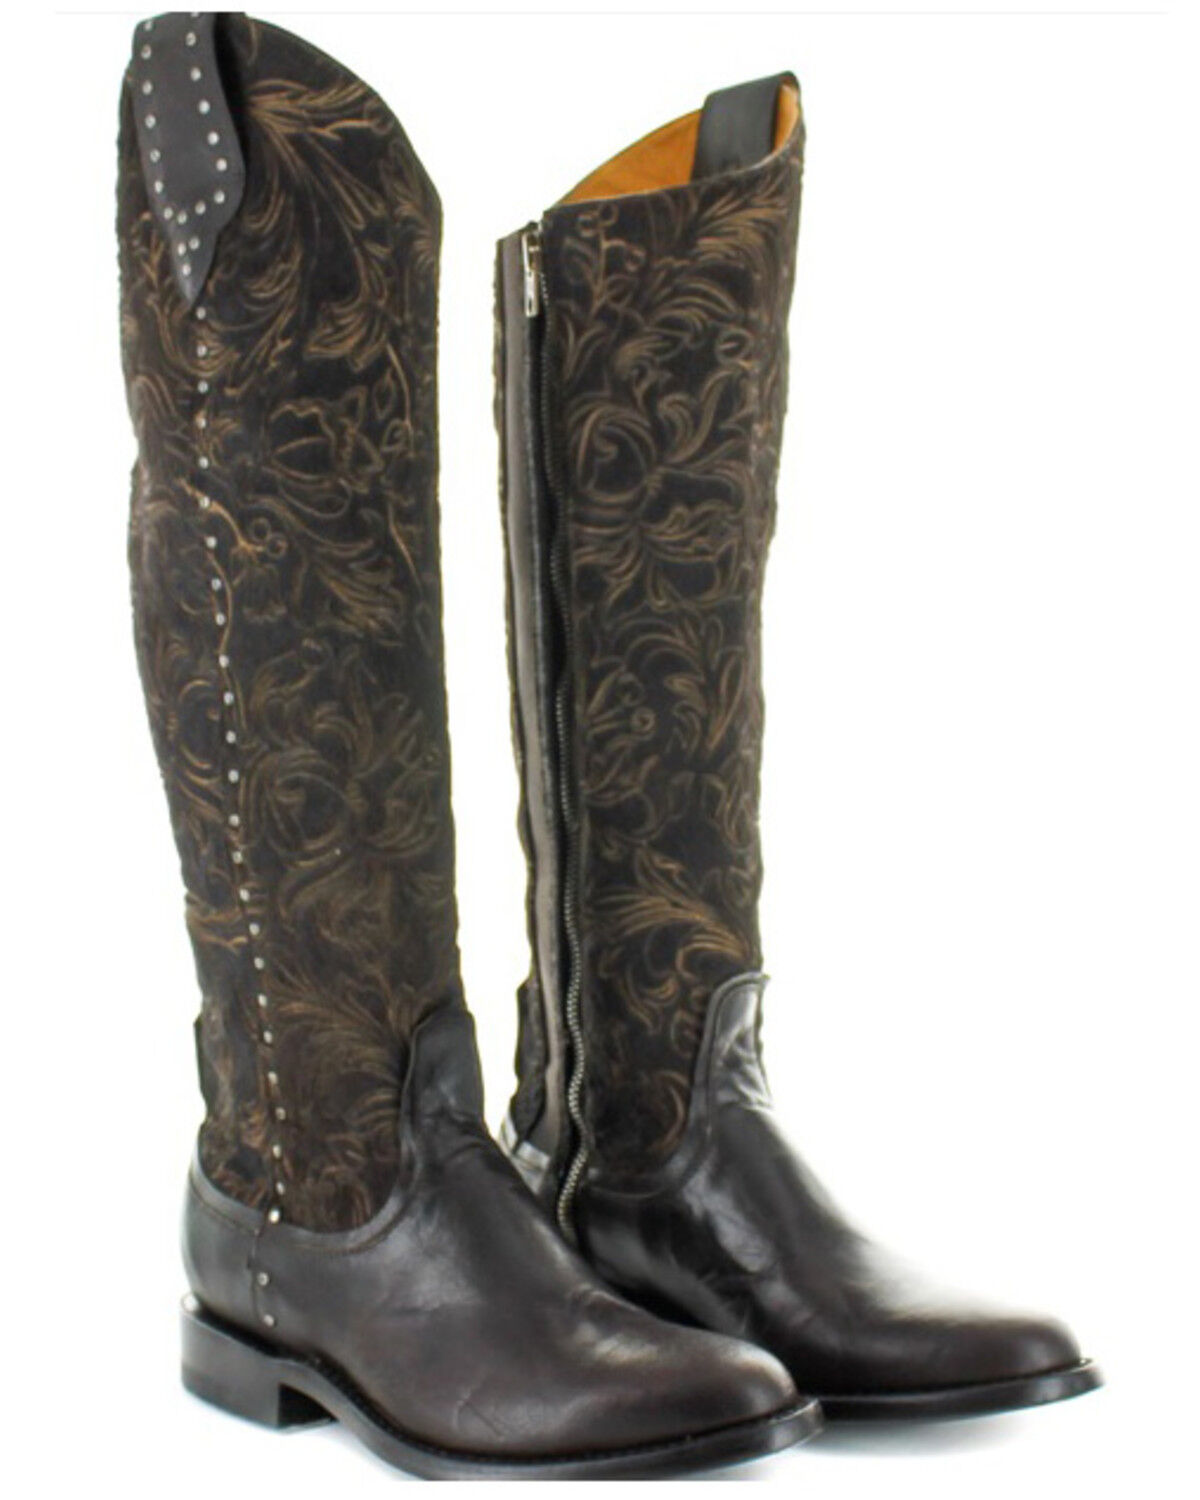 country outfitters women's boots